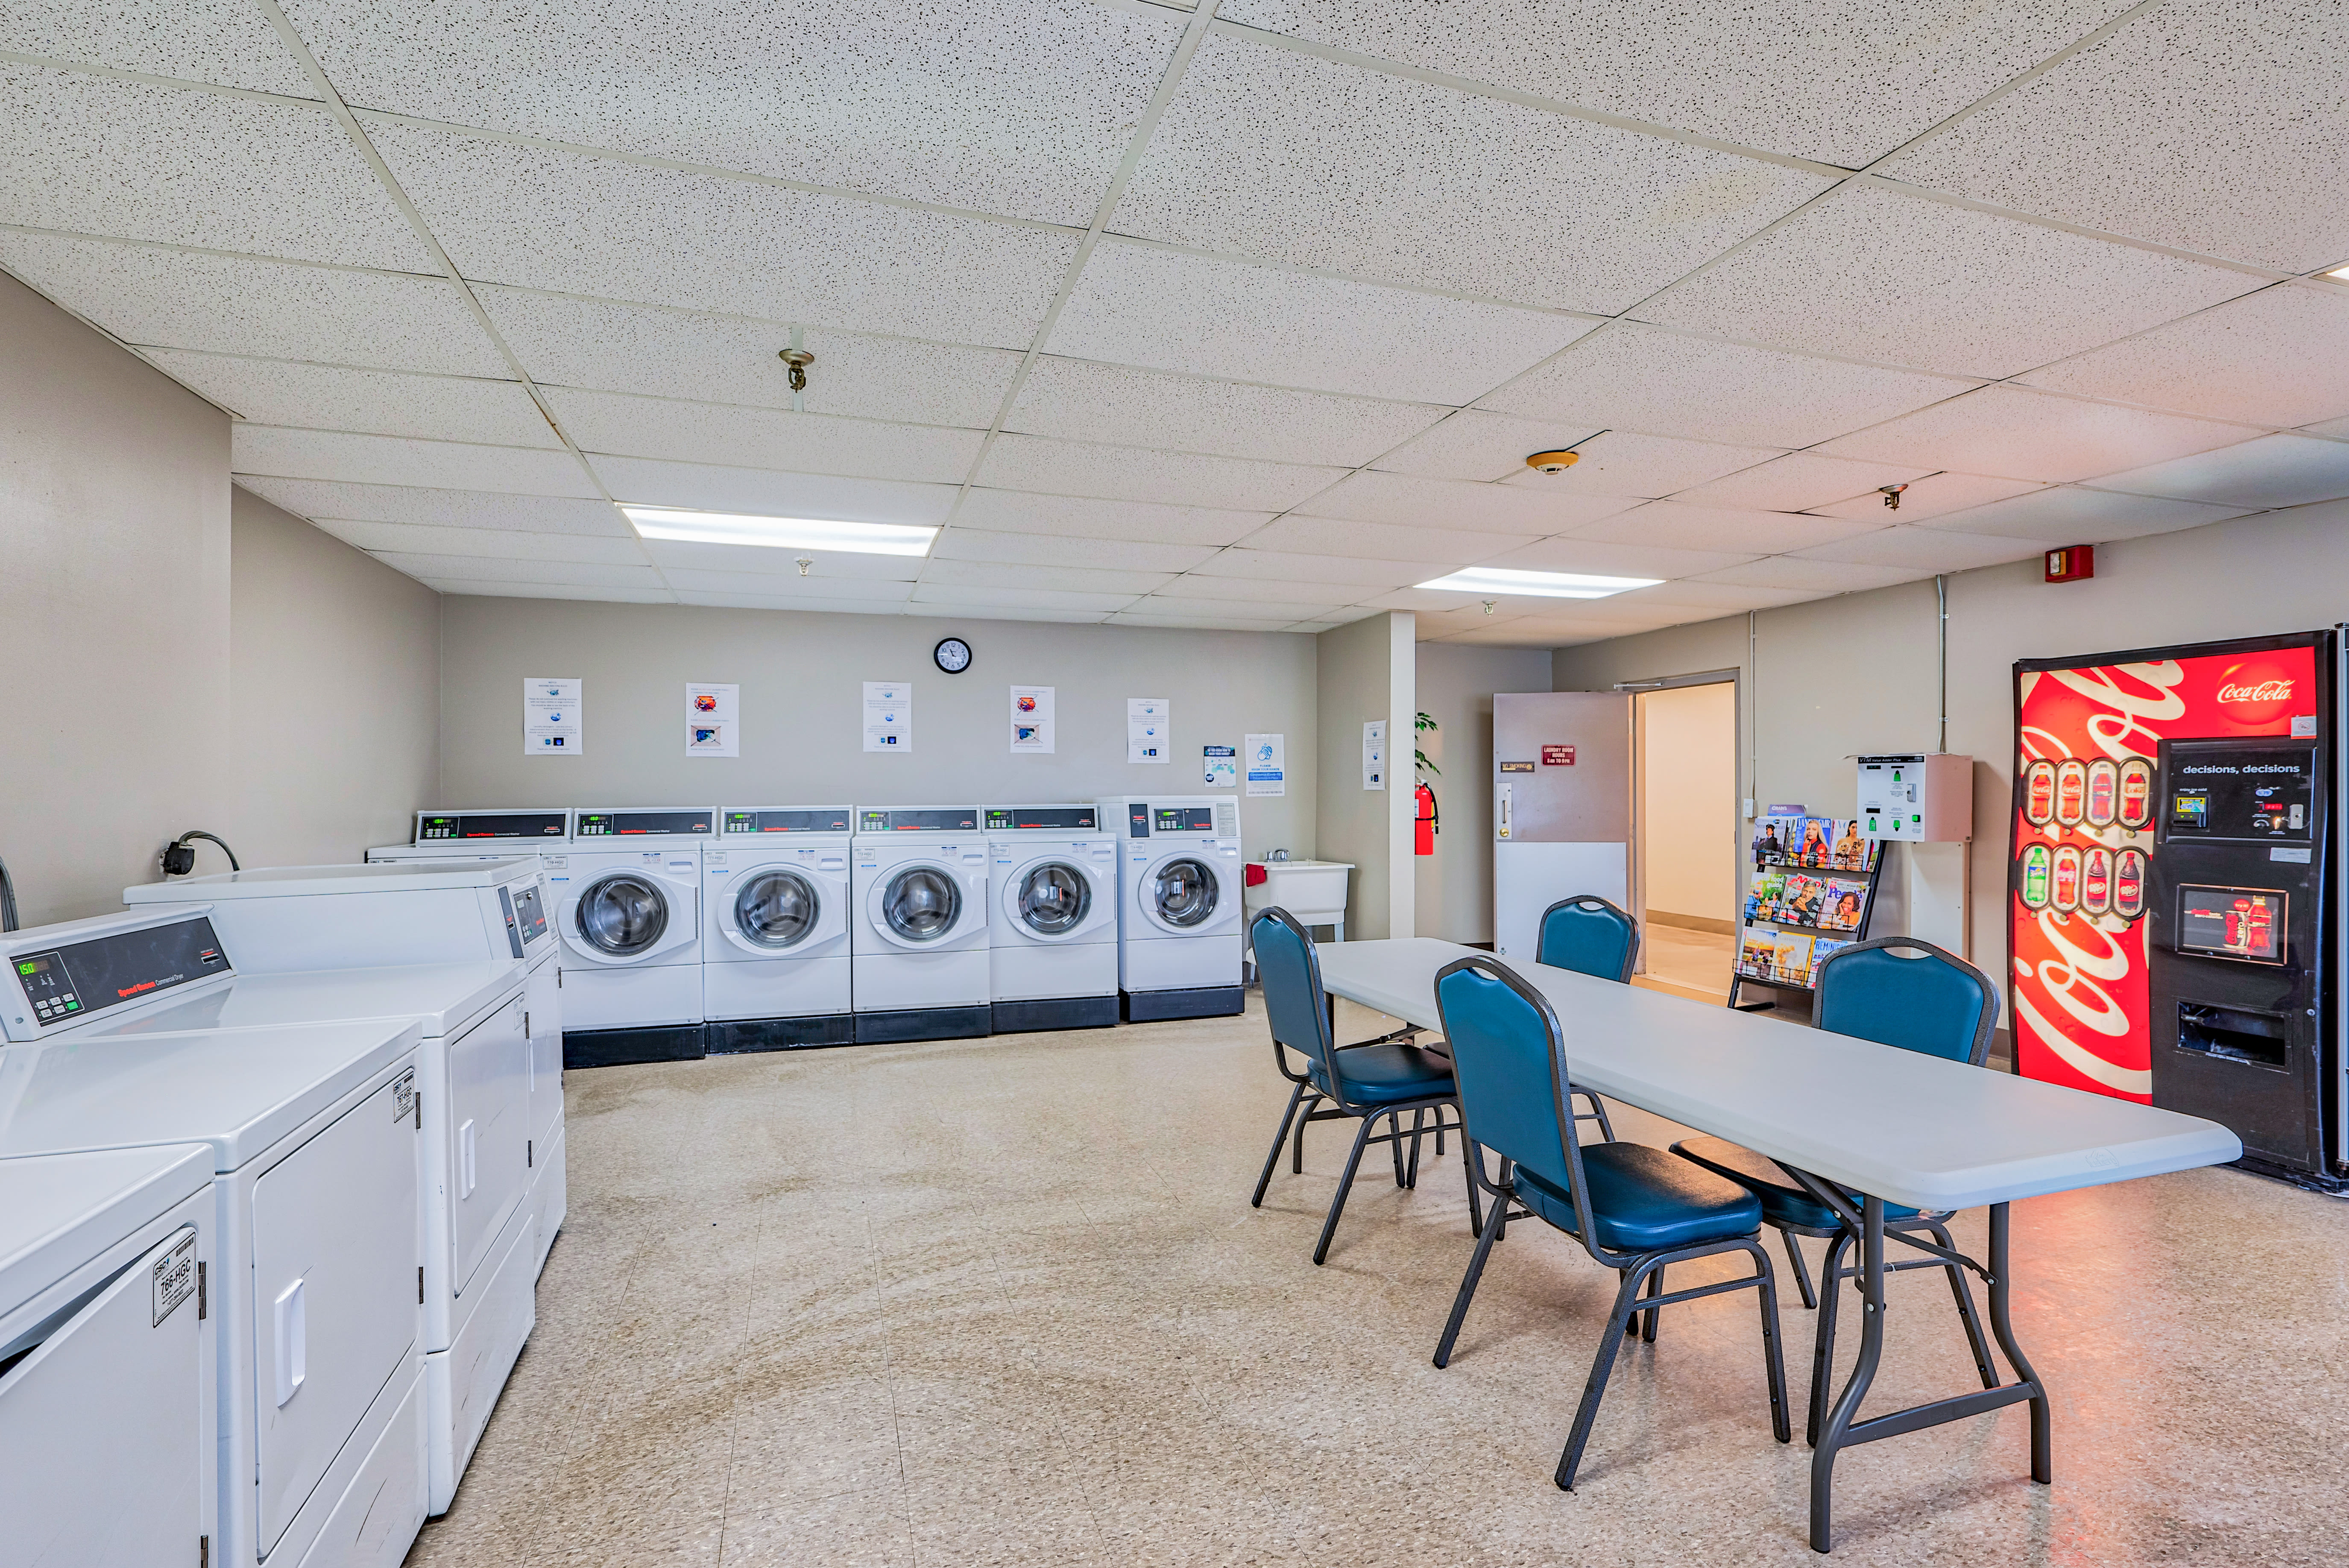 Laundry room at Towne Centre Place in Ypsilanti, Michigan